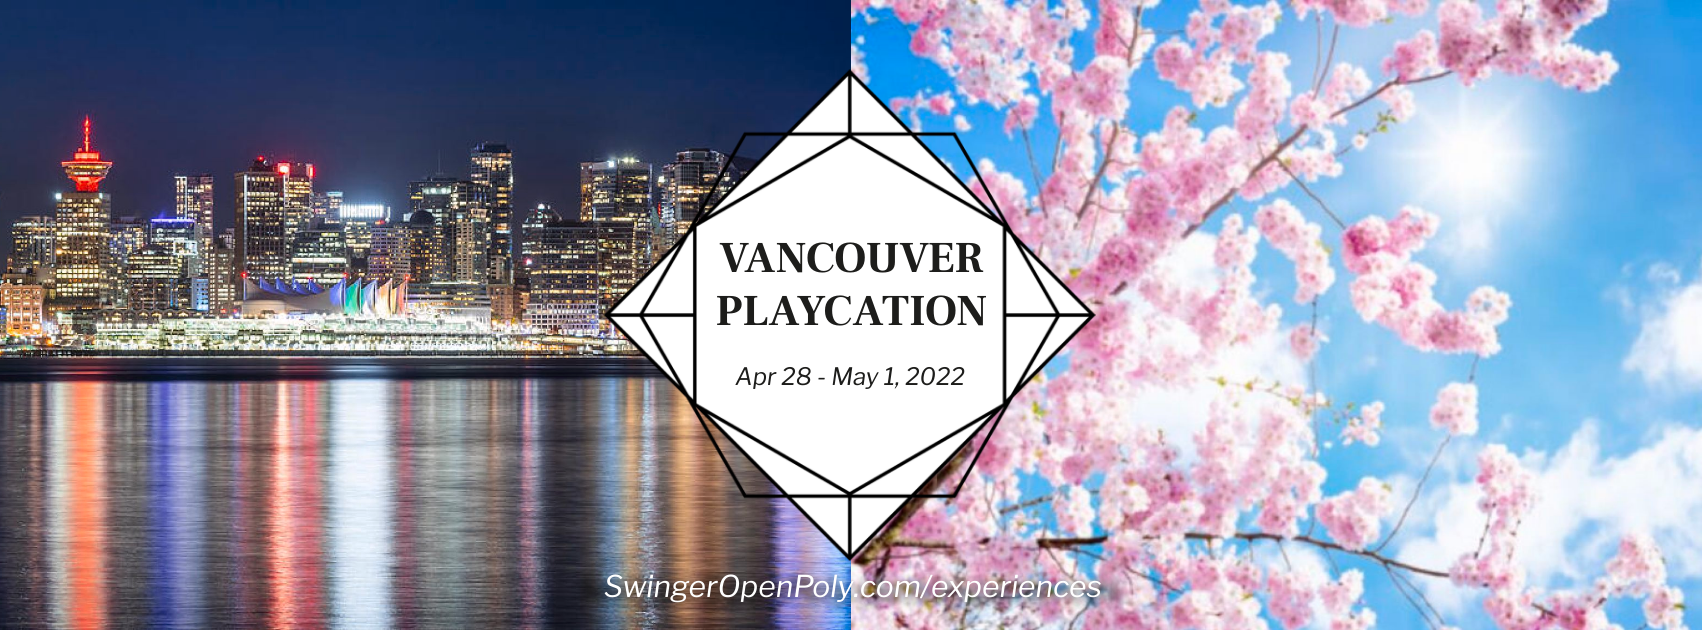 VANCOUVER PLAYCATION picture image